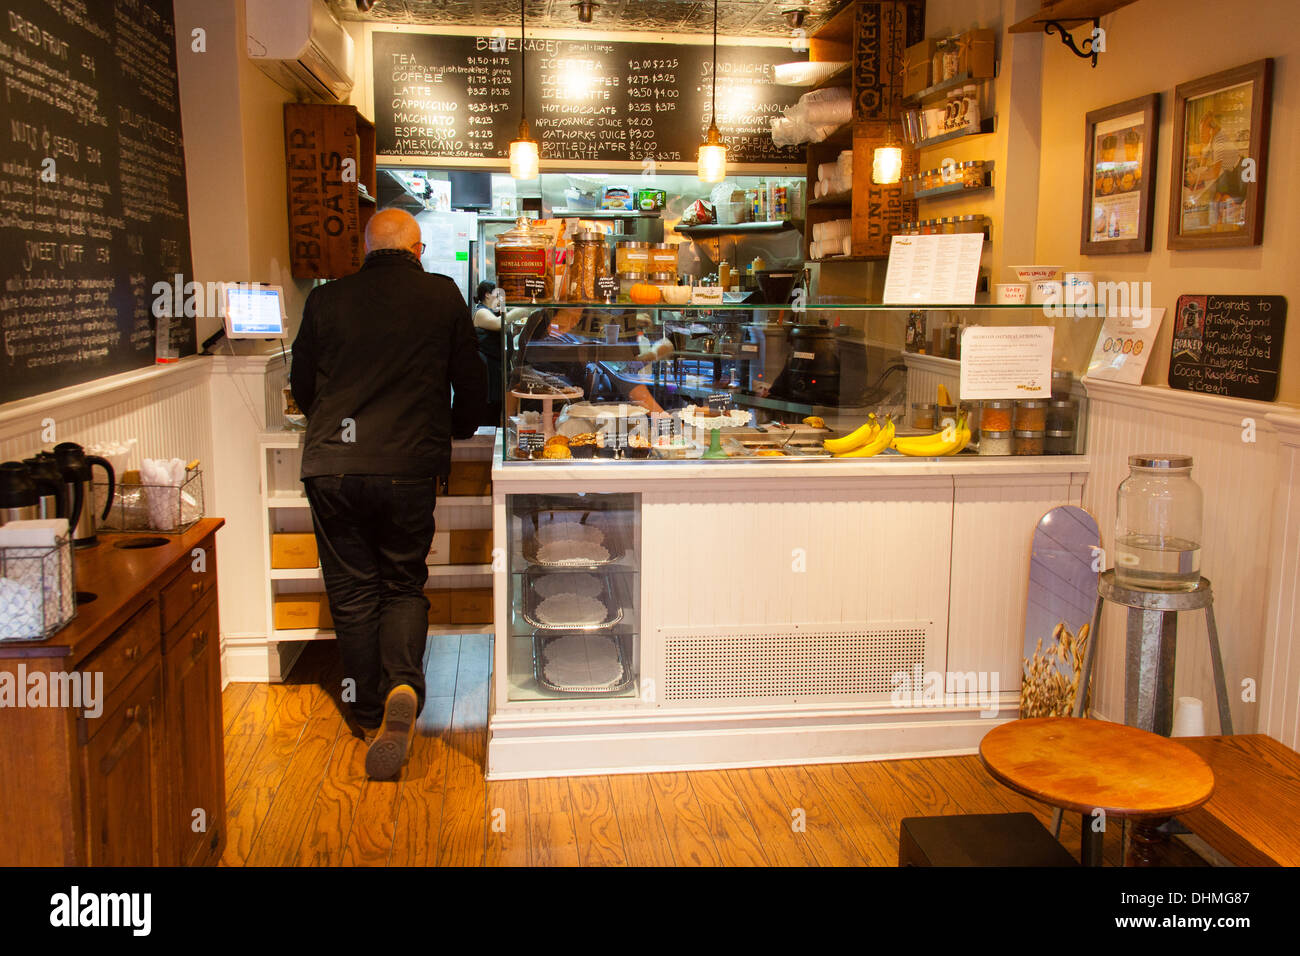 OatMeals bar, West 3rd Street,New York City, United States of America. Stock Photo